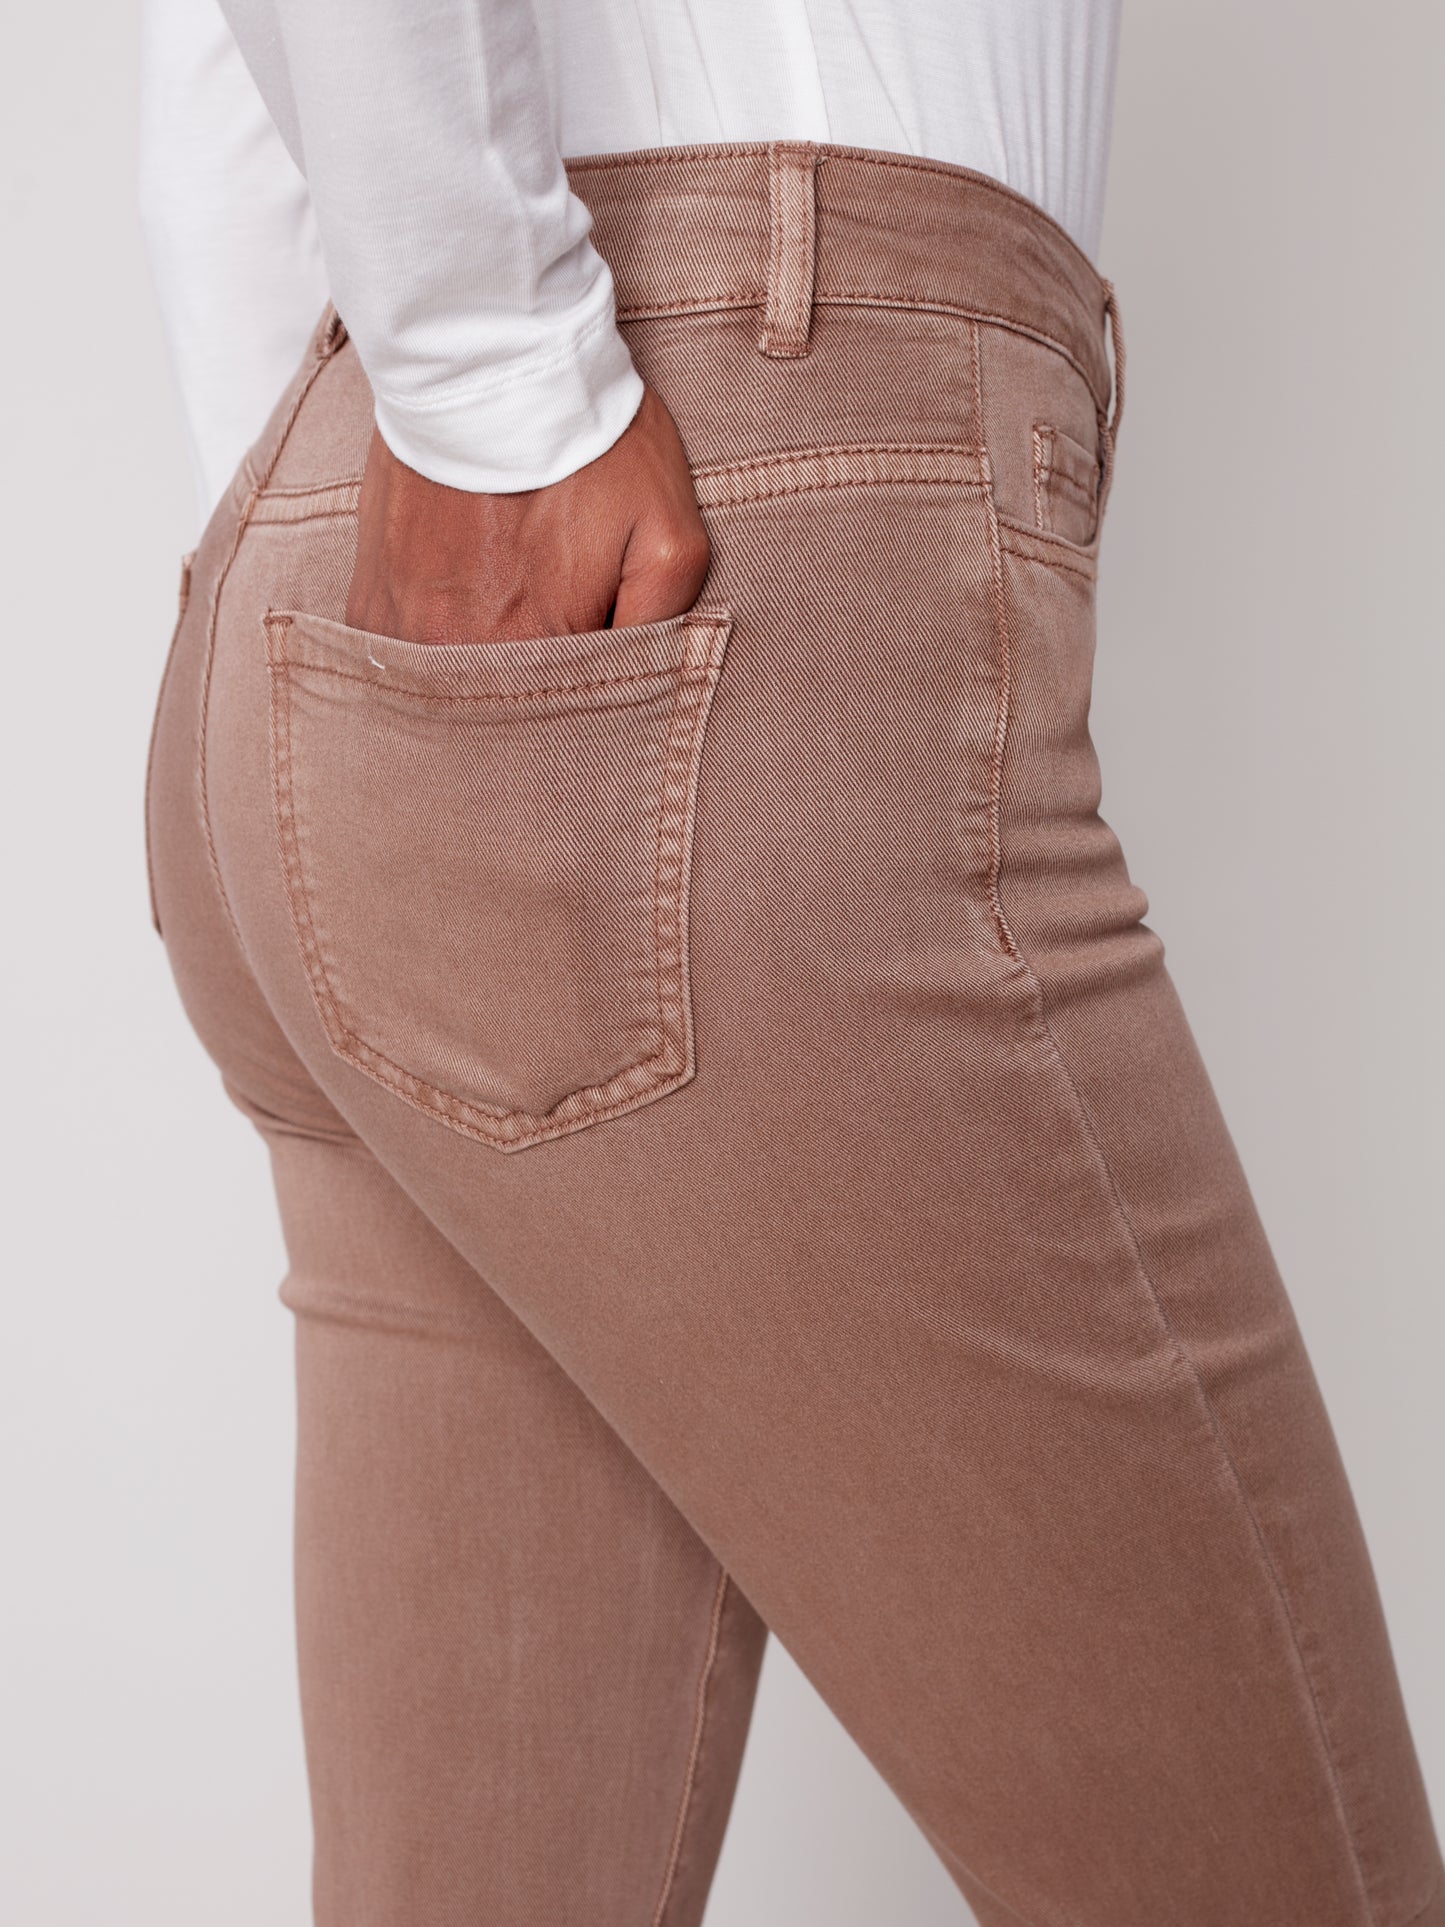 Charlie B Charlie B - Colored Twill Cuff Pant - Truffle available at The Good Life Boutique